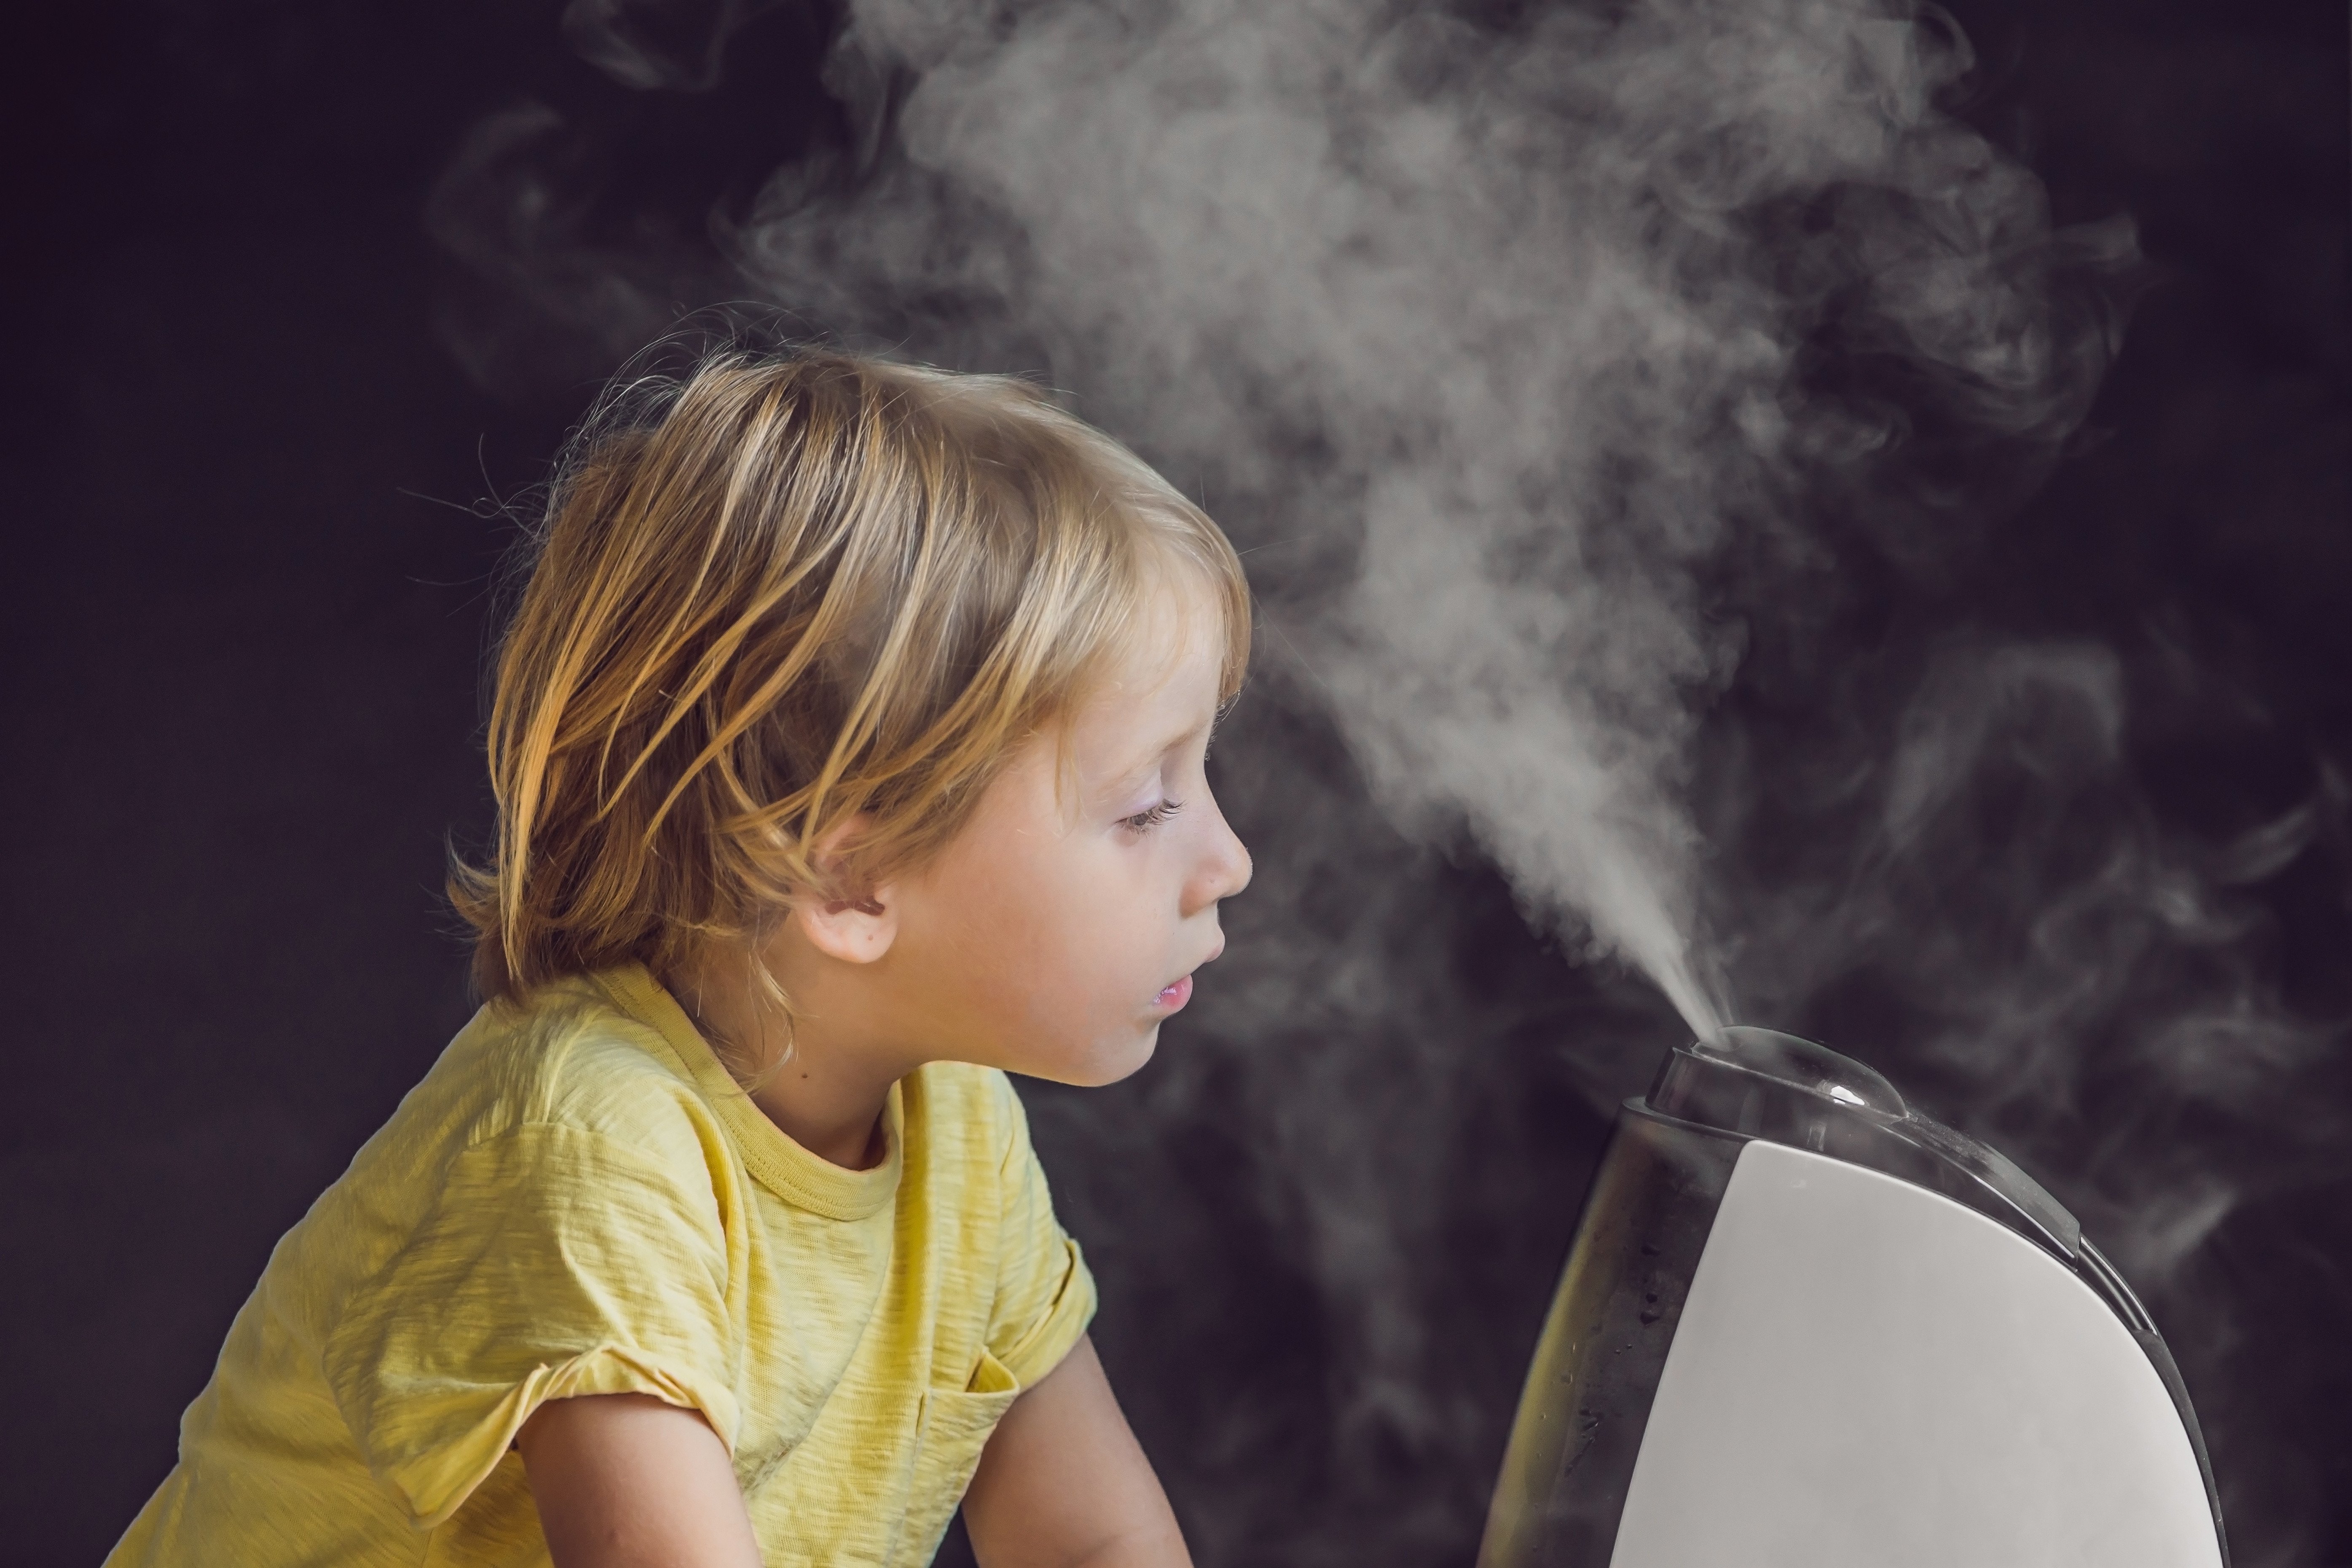 Young girl with face in front of humidifier